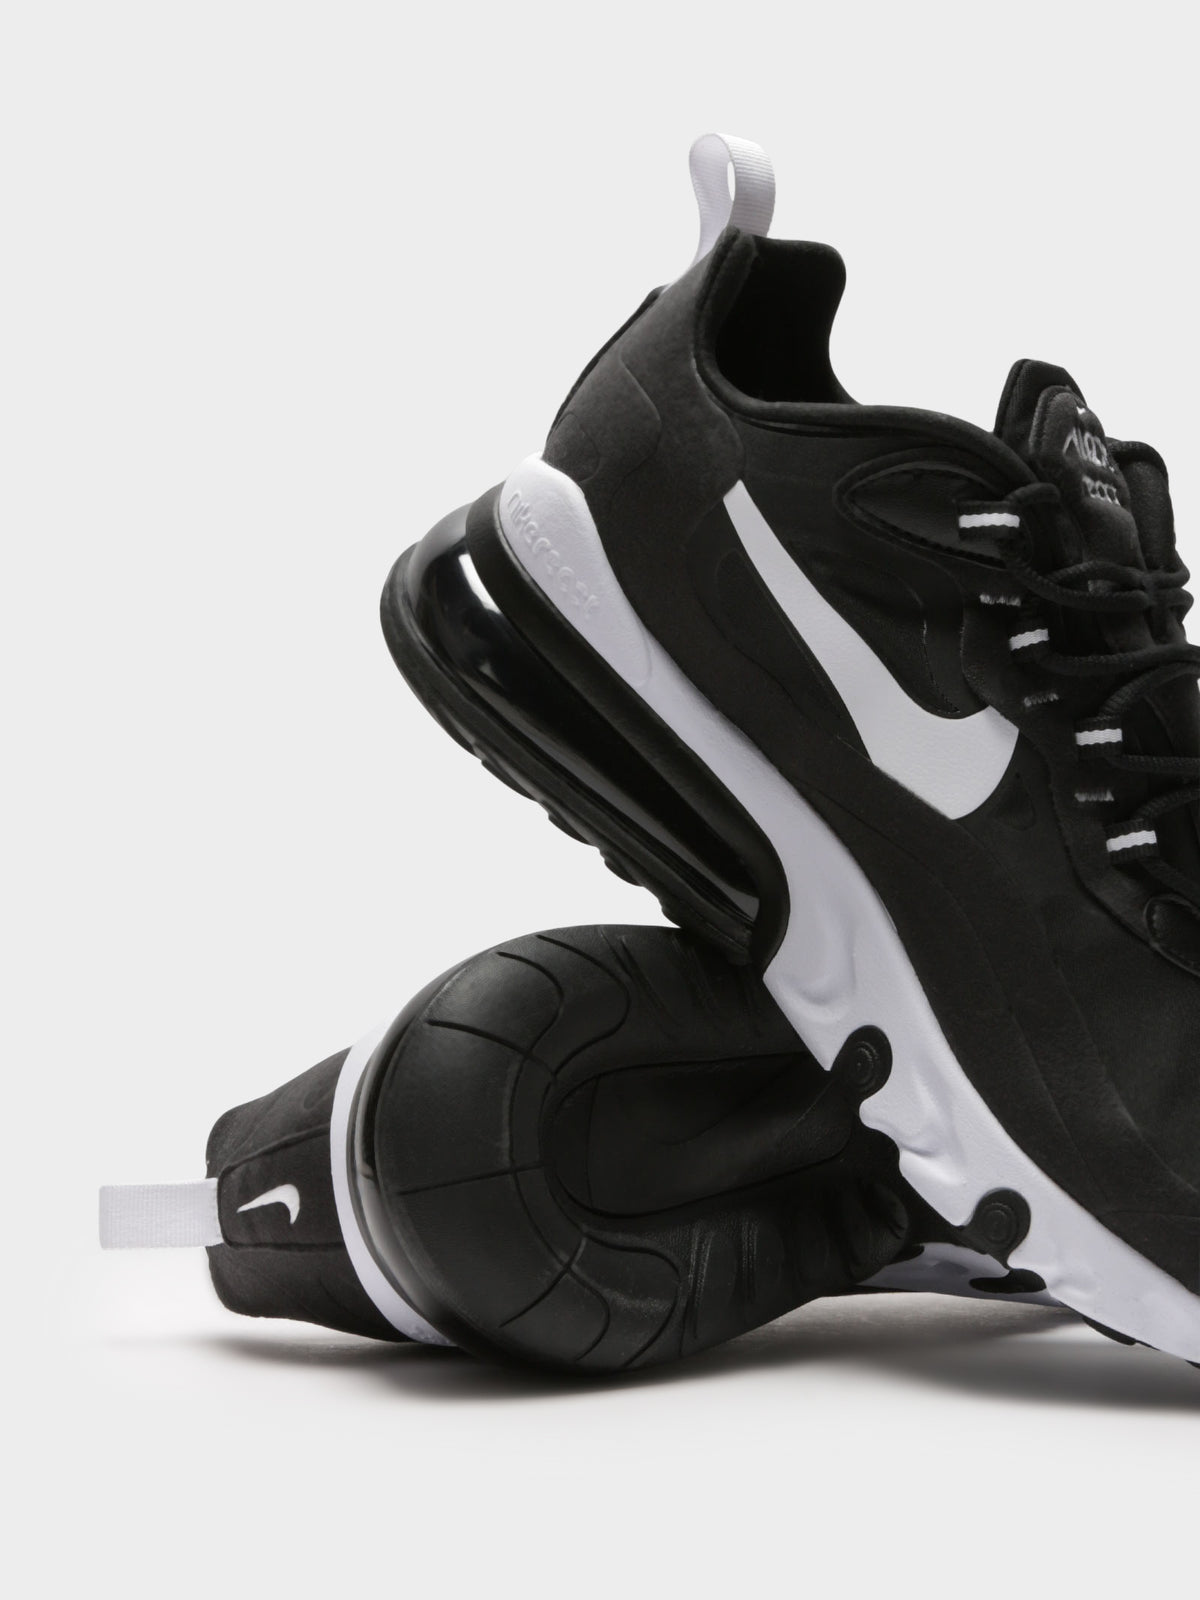 Air Max 270 React Sneakers in Black &amp; White